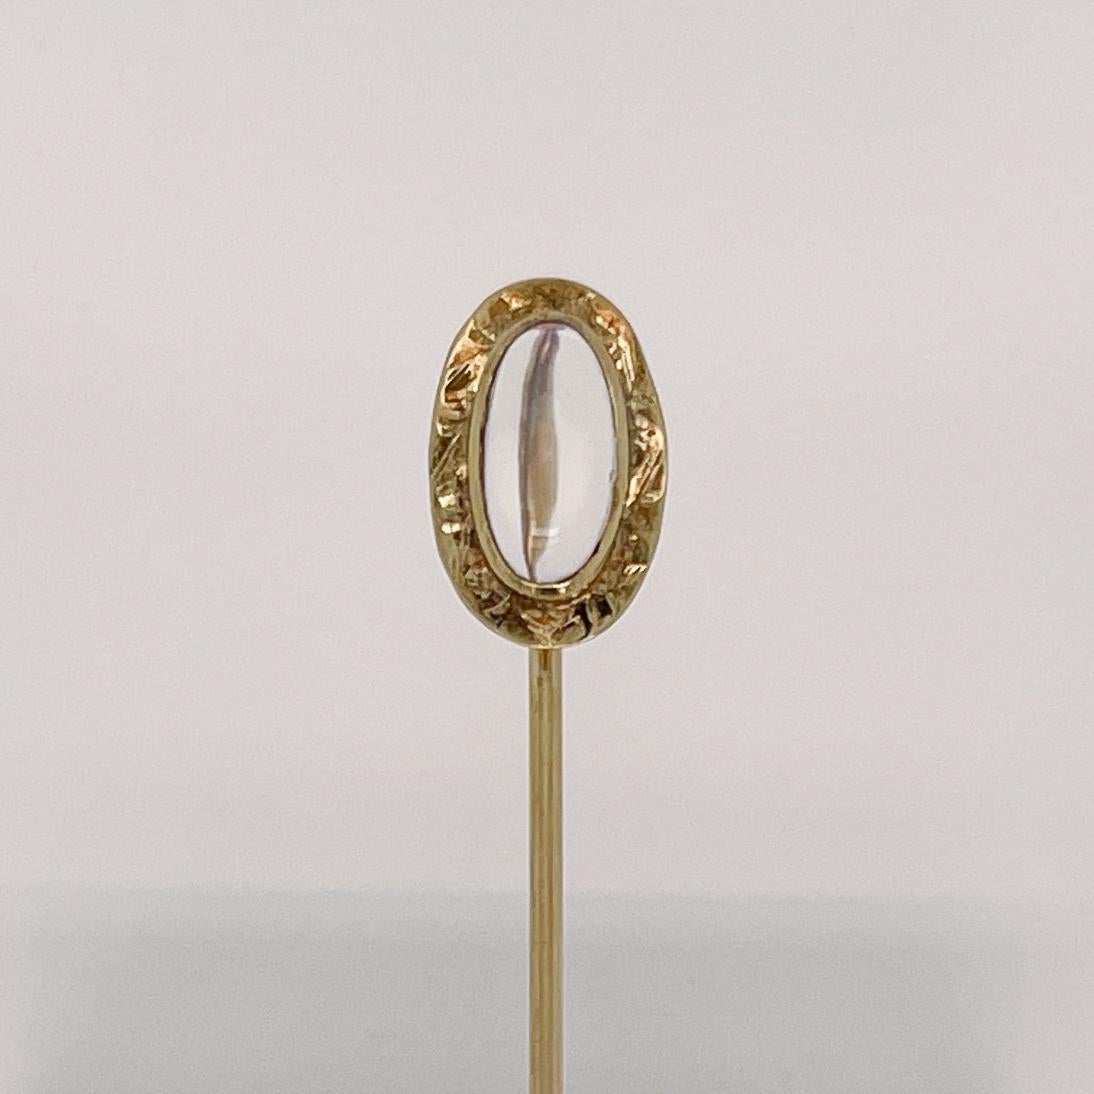 A very fine antique Edwardian gold and moonstone stickpin.

With a smooth, oval moonstone cabochon bezel set in 10k gold with decorative oval frame.

Simply a great stickpin!

Date:
Early 20th Century

Overall Condition:
It is in overall good,